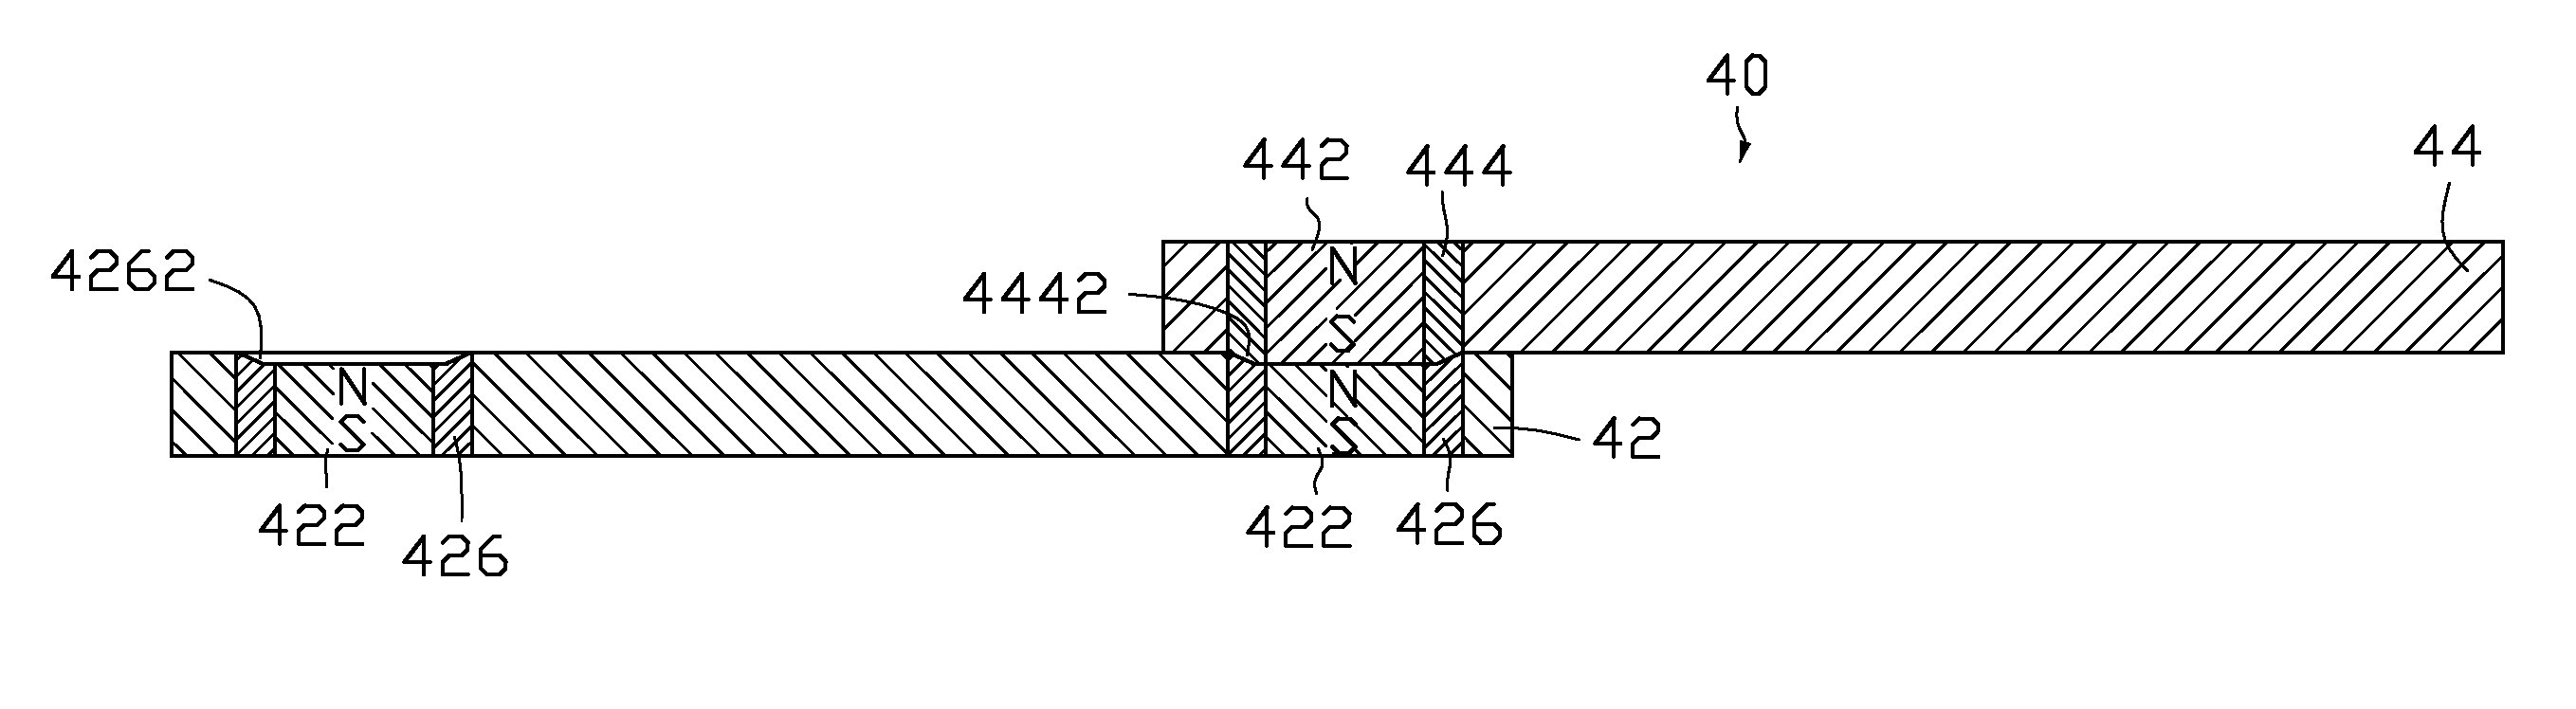 Slide mechanism for slide-type portable terminal devices